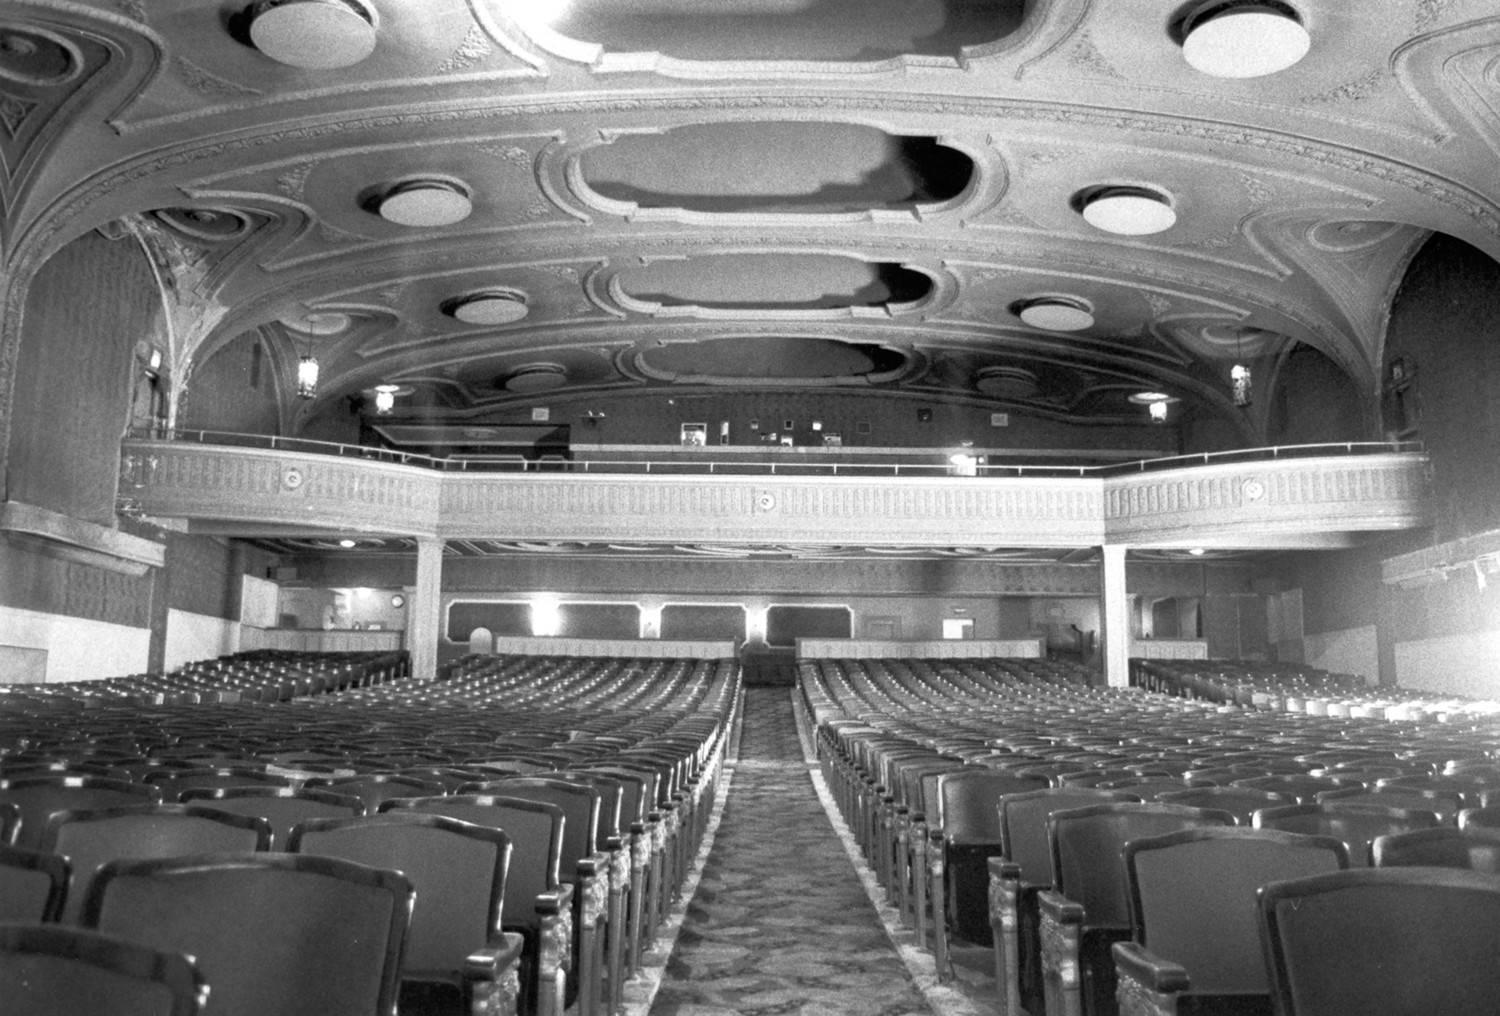 Variety Store Building and Theatre, Cleveland Ohio Theater auditorium (1980)